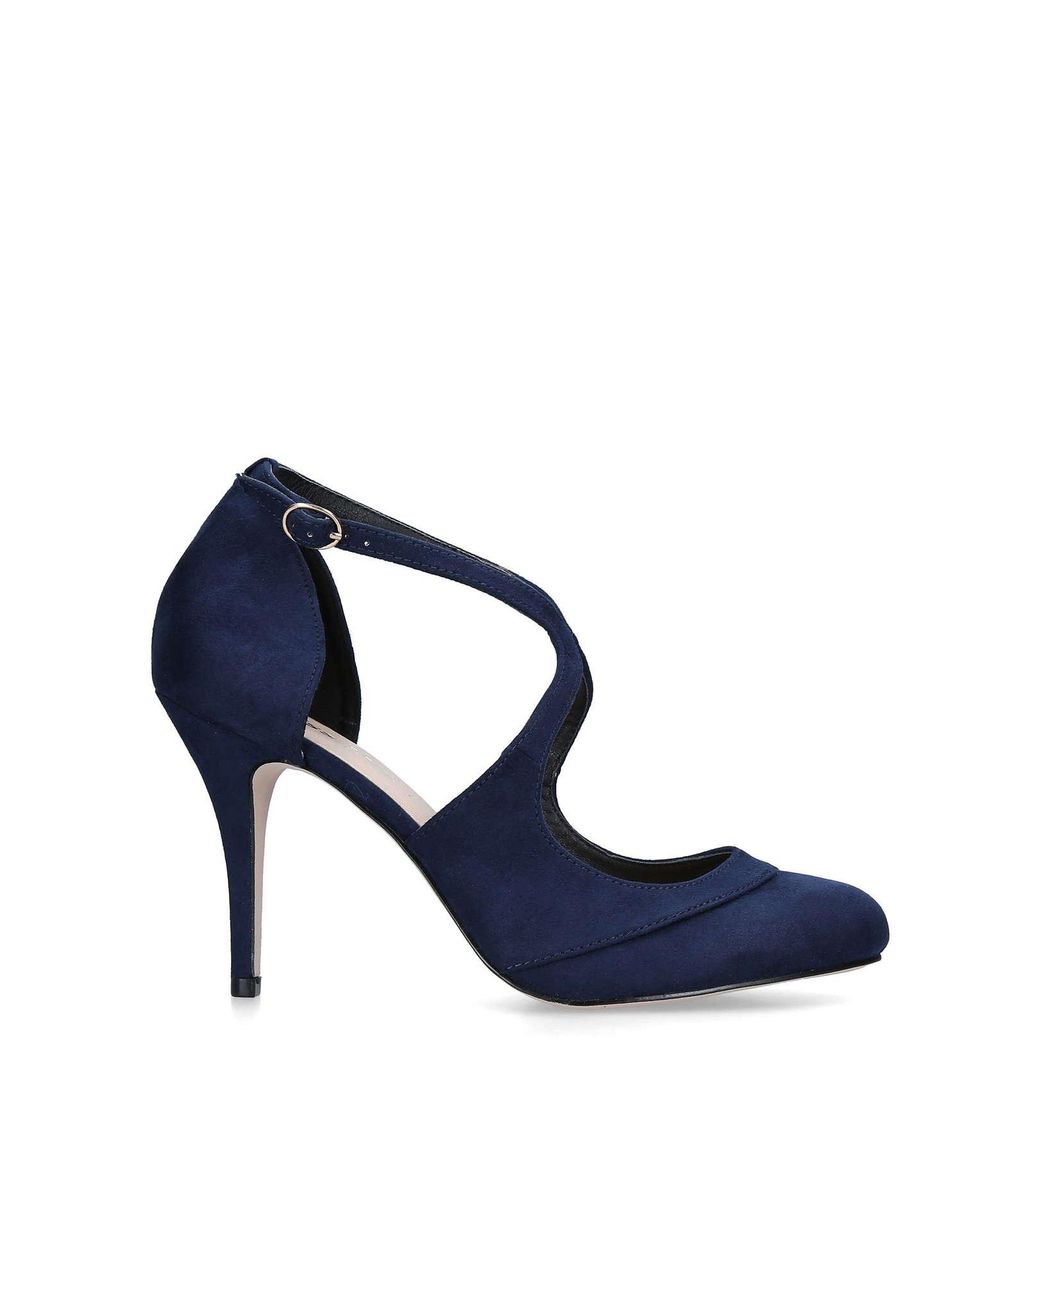 Miss Kg Synthetic Natalie High Heeled Shoe in Navy (Blue) | Lyst UK